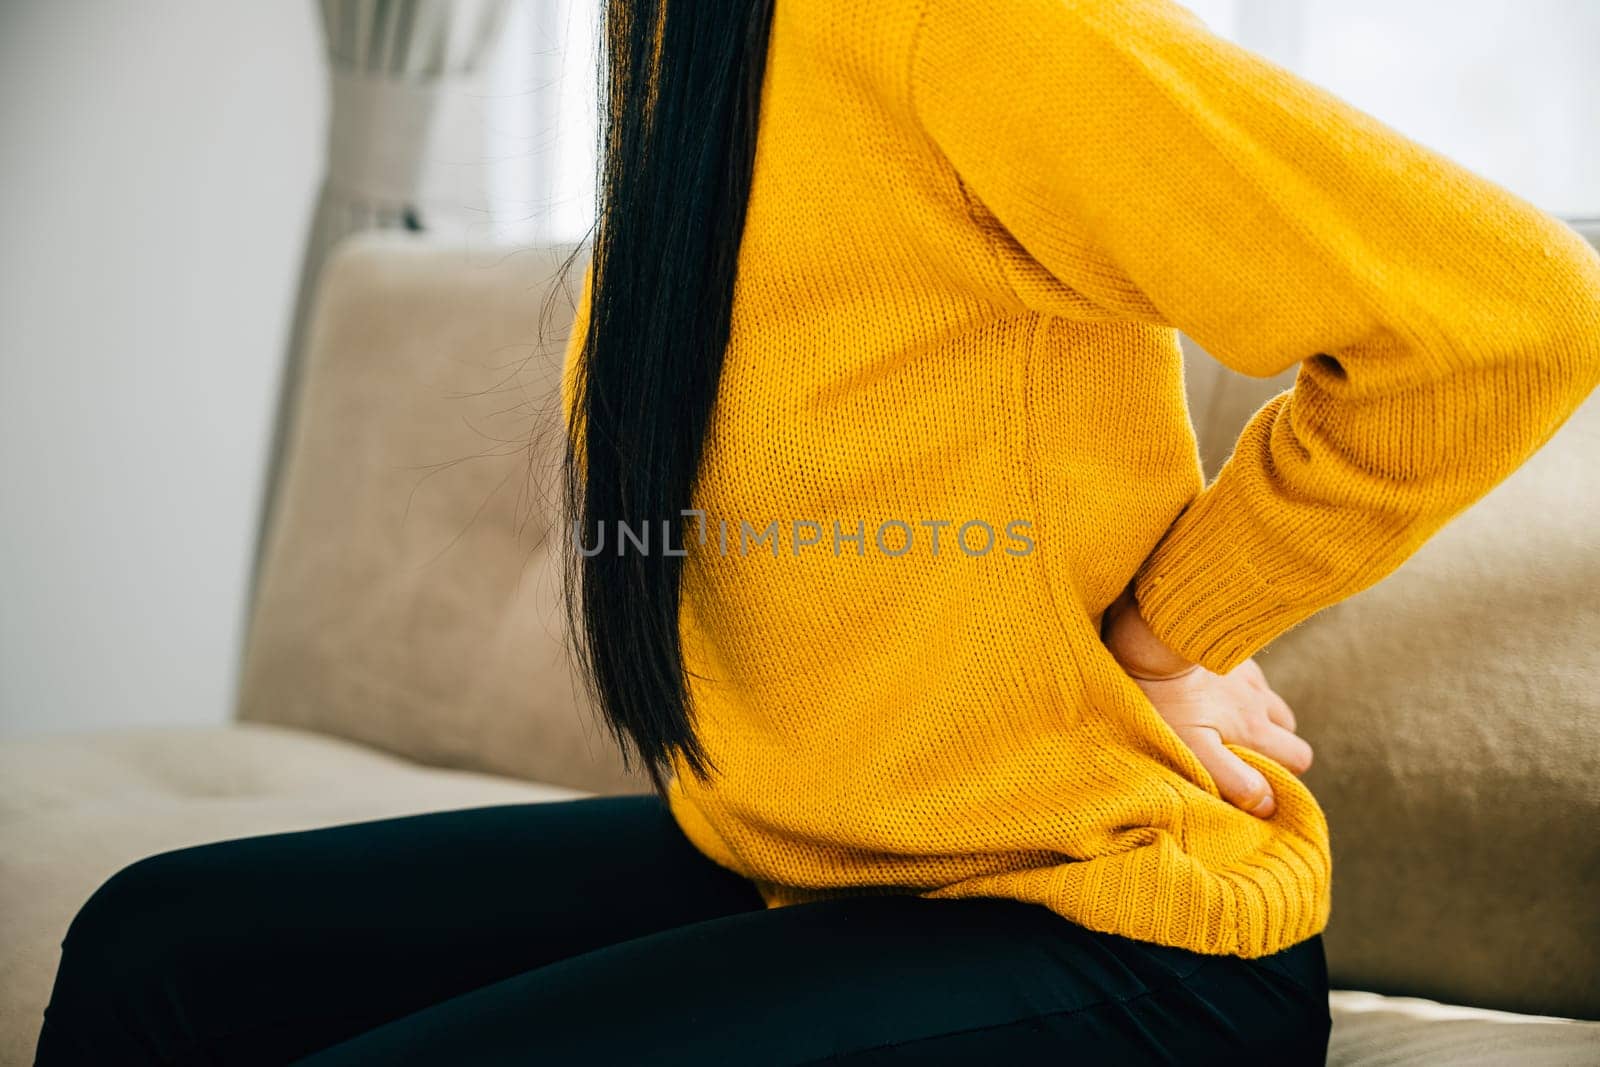 Asian woman holds her lower back in unbearable pain on a sofa by Sorapop